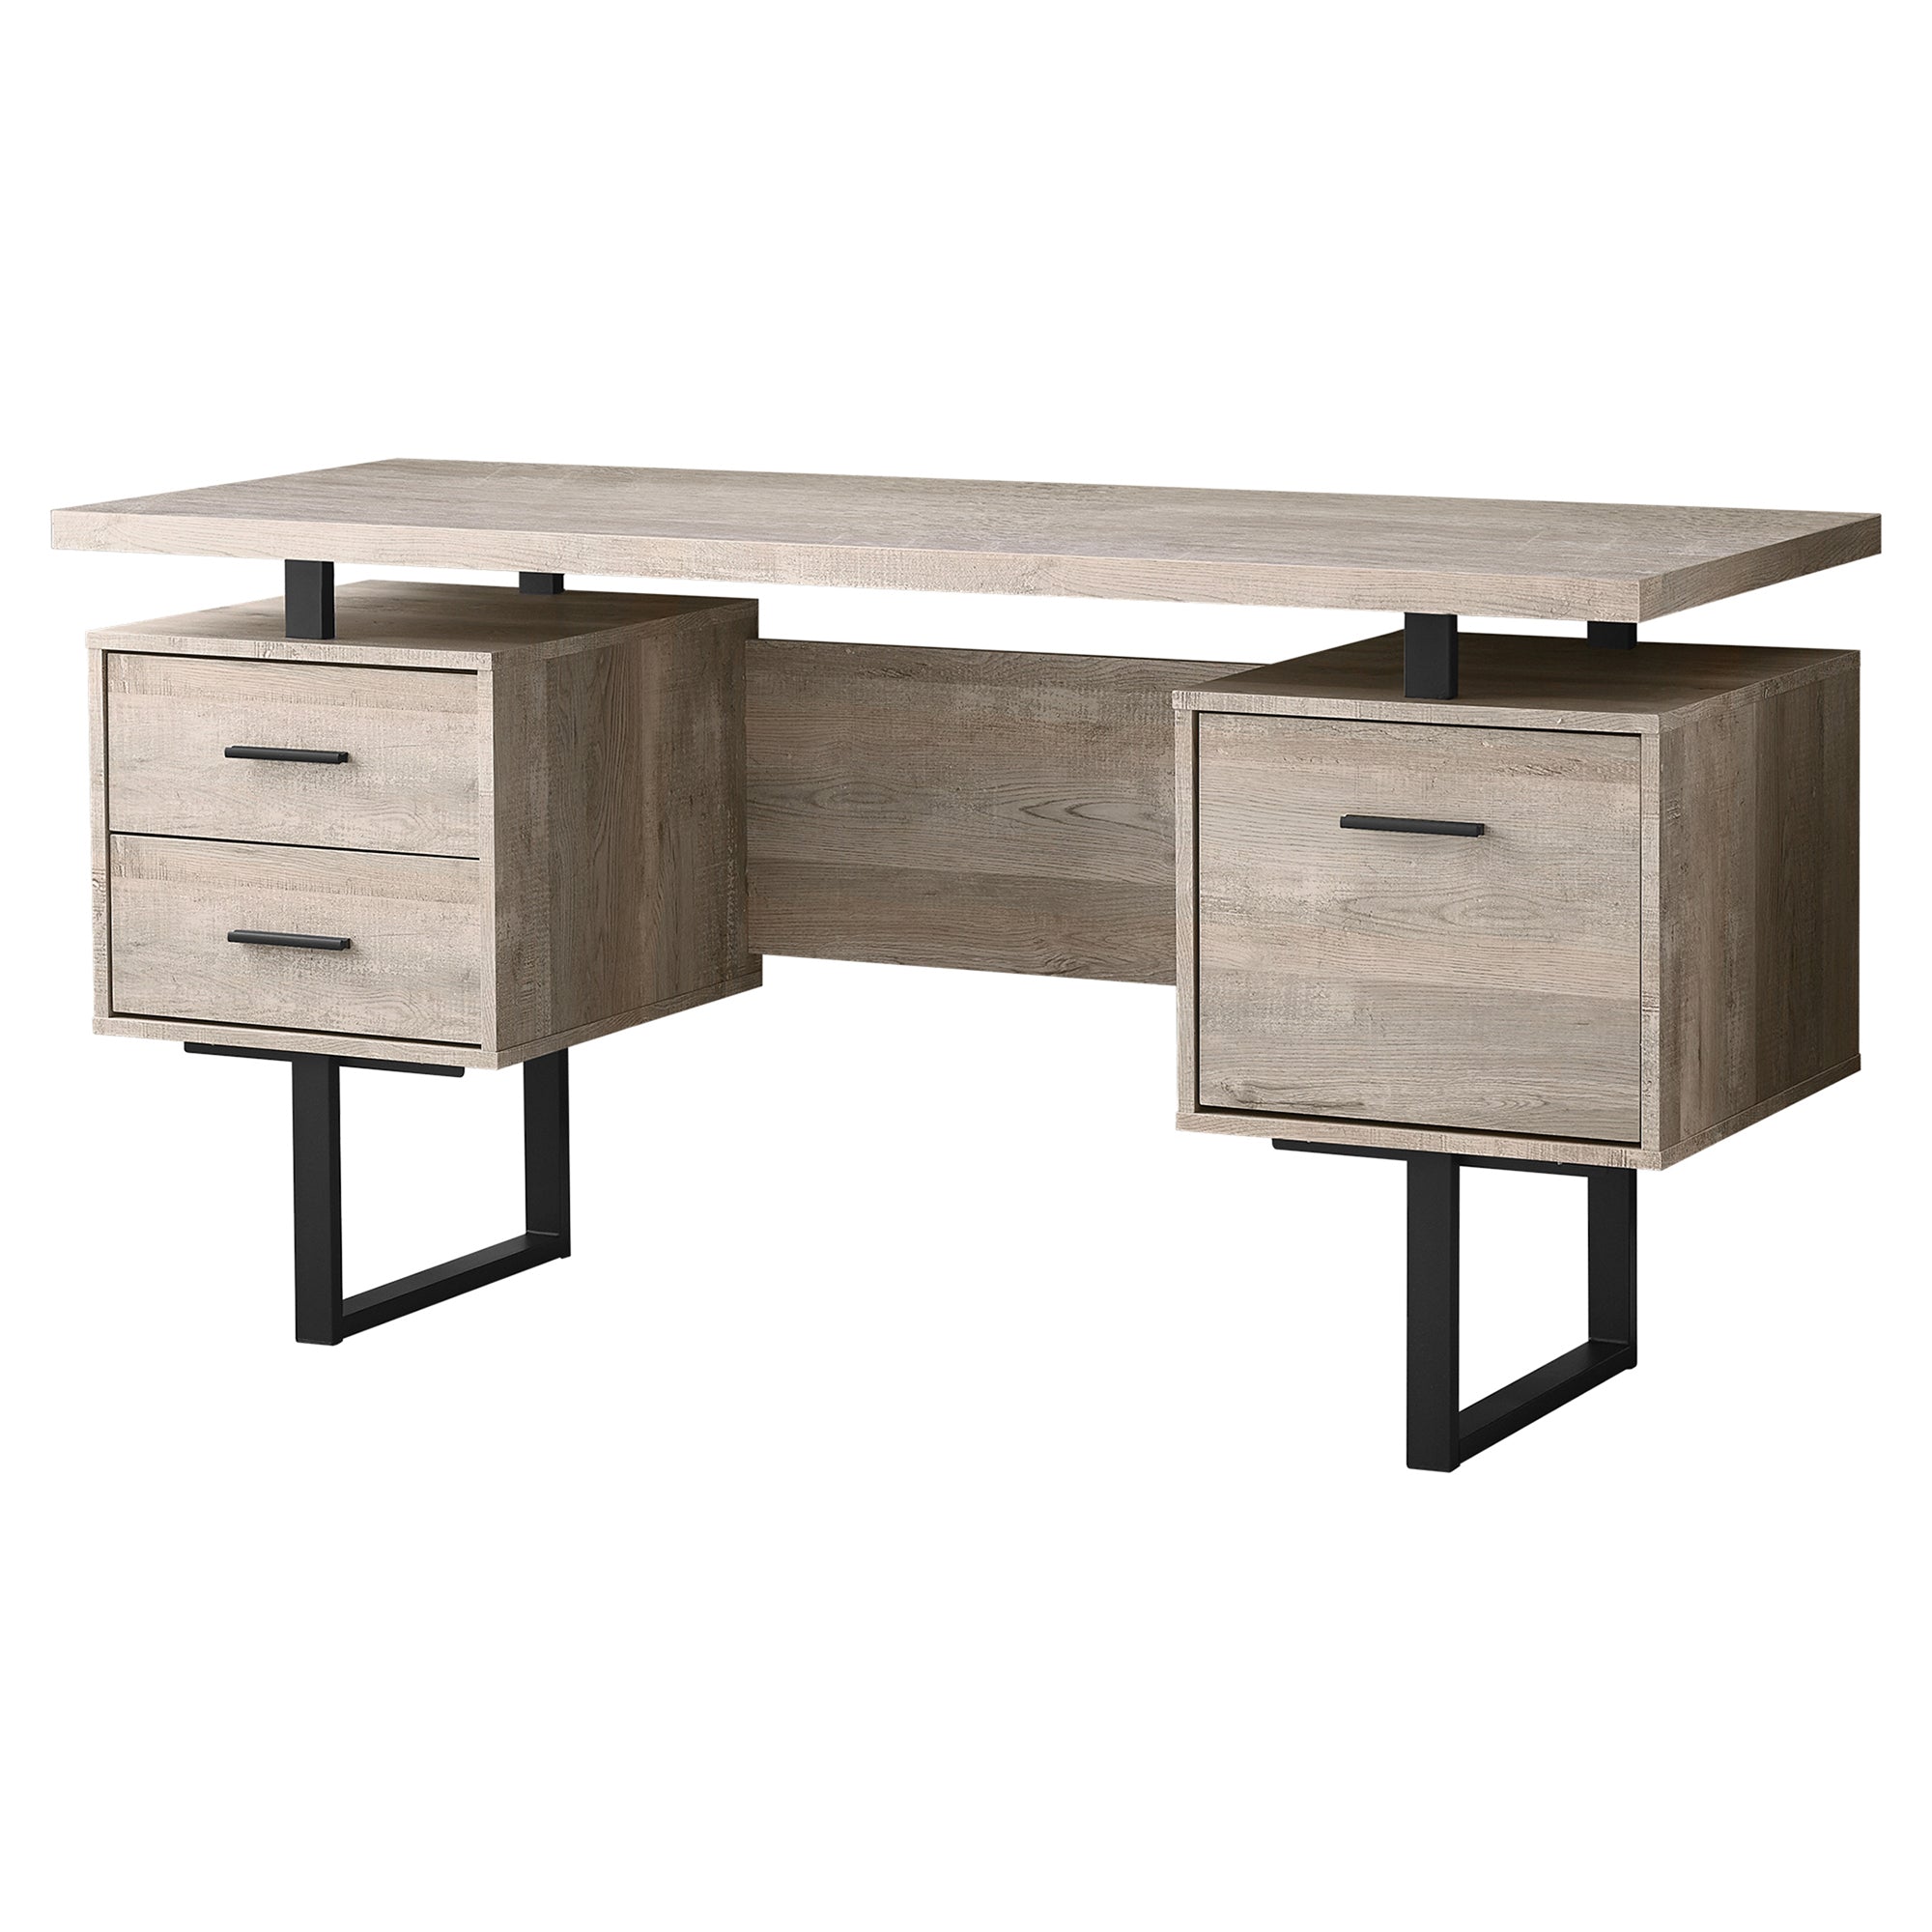 MN-847418    Computer Desk, Home Office, Laptop, Left, Right Set-Up, Storage Drawers, 60"L, Metal, Laminate, Taupe Reclaimed Wood Look, Black, Contemporary, Modern